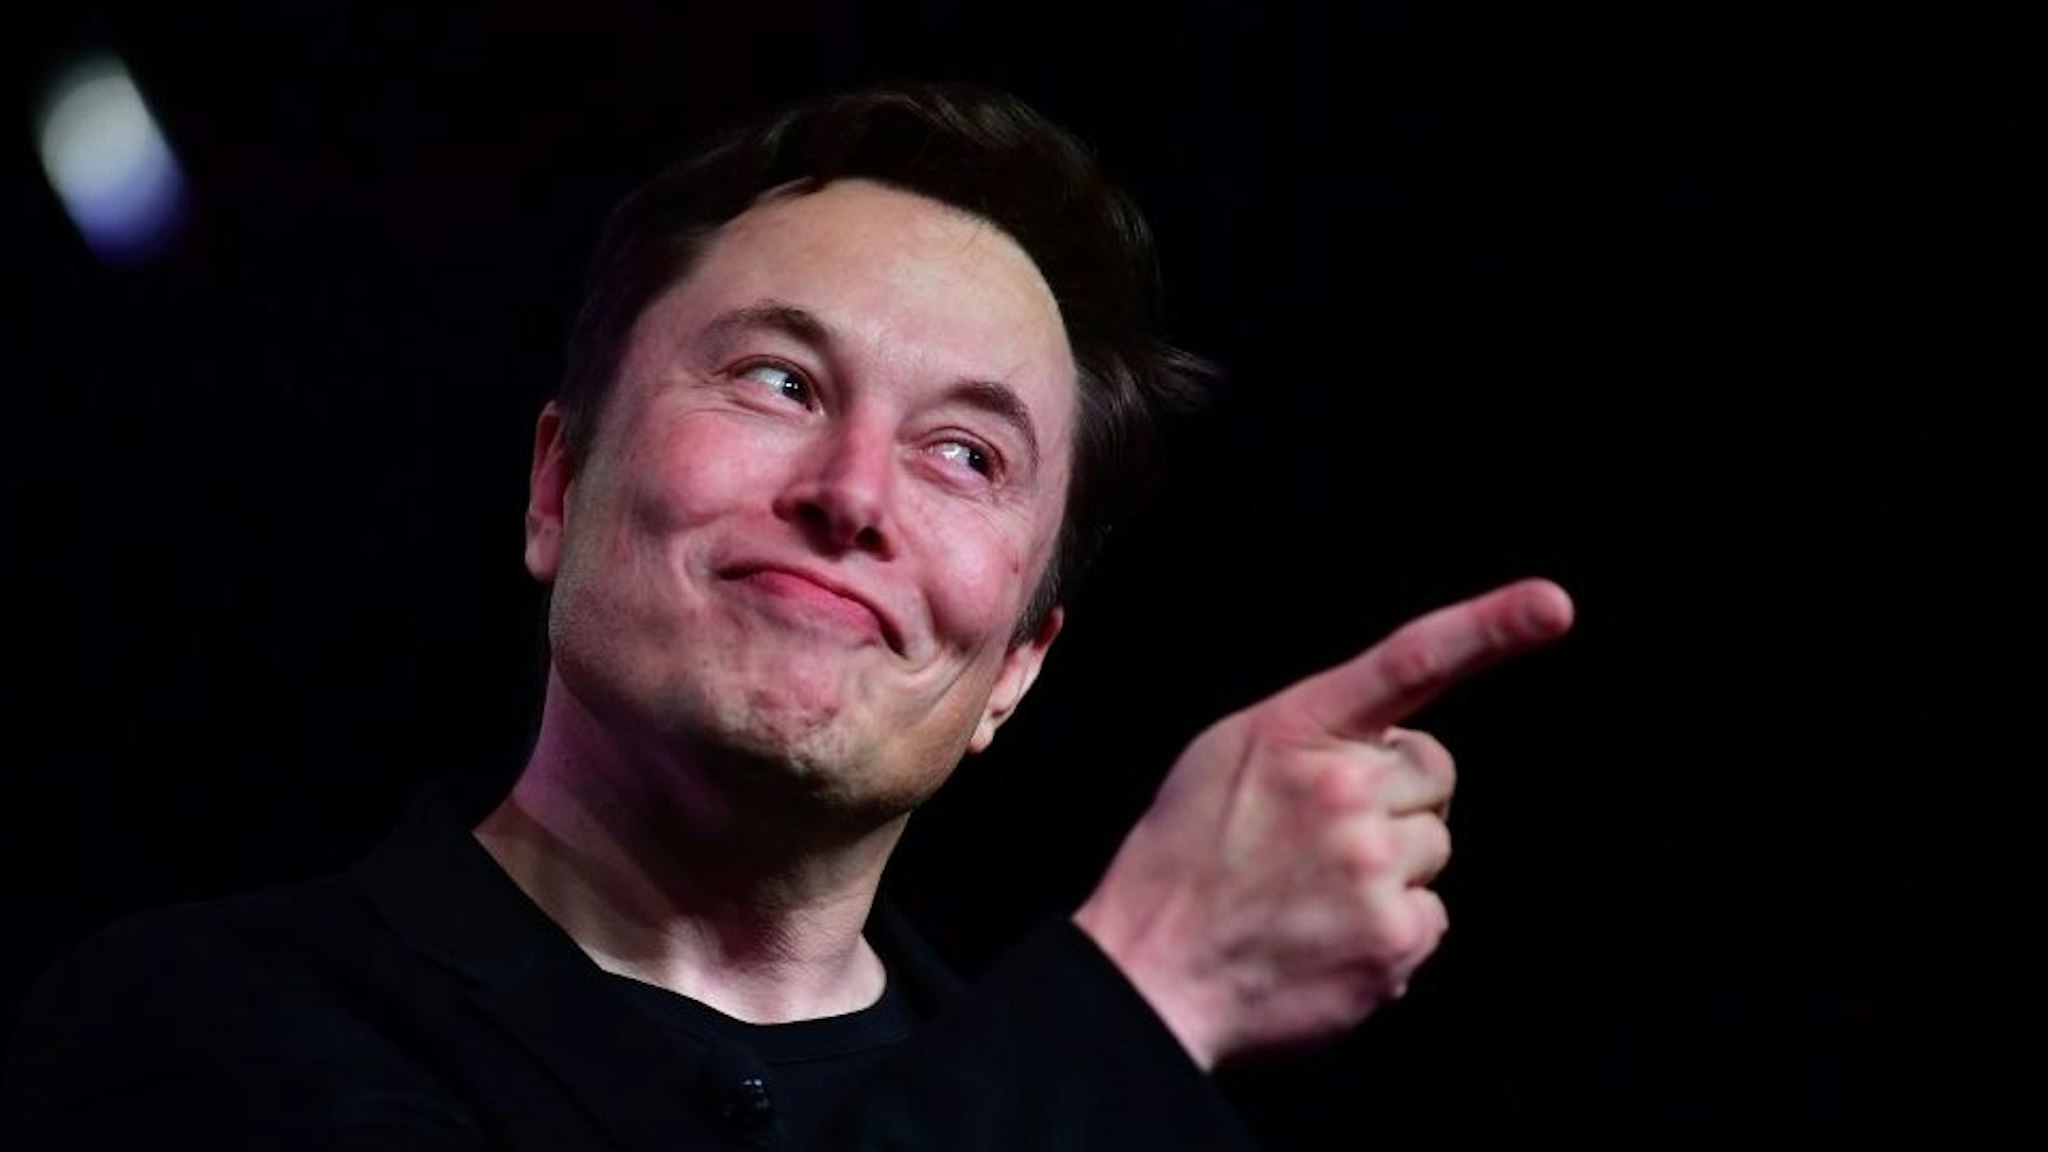 Tesla CEO Elon Musk speaks during the unveiling of the new Tesla Model Y in Hawthorne, California on March 14, 2019. (Photo by Frederic J. BROWN / AFP) (Photo credit should read